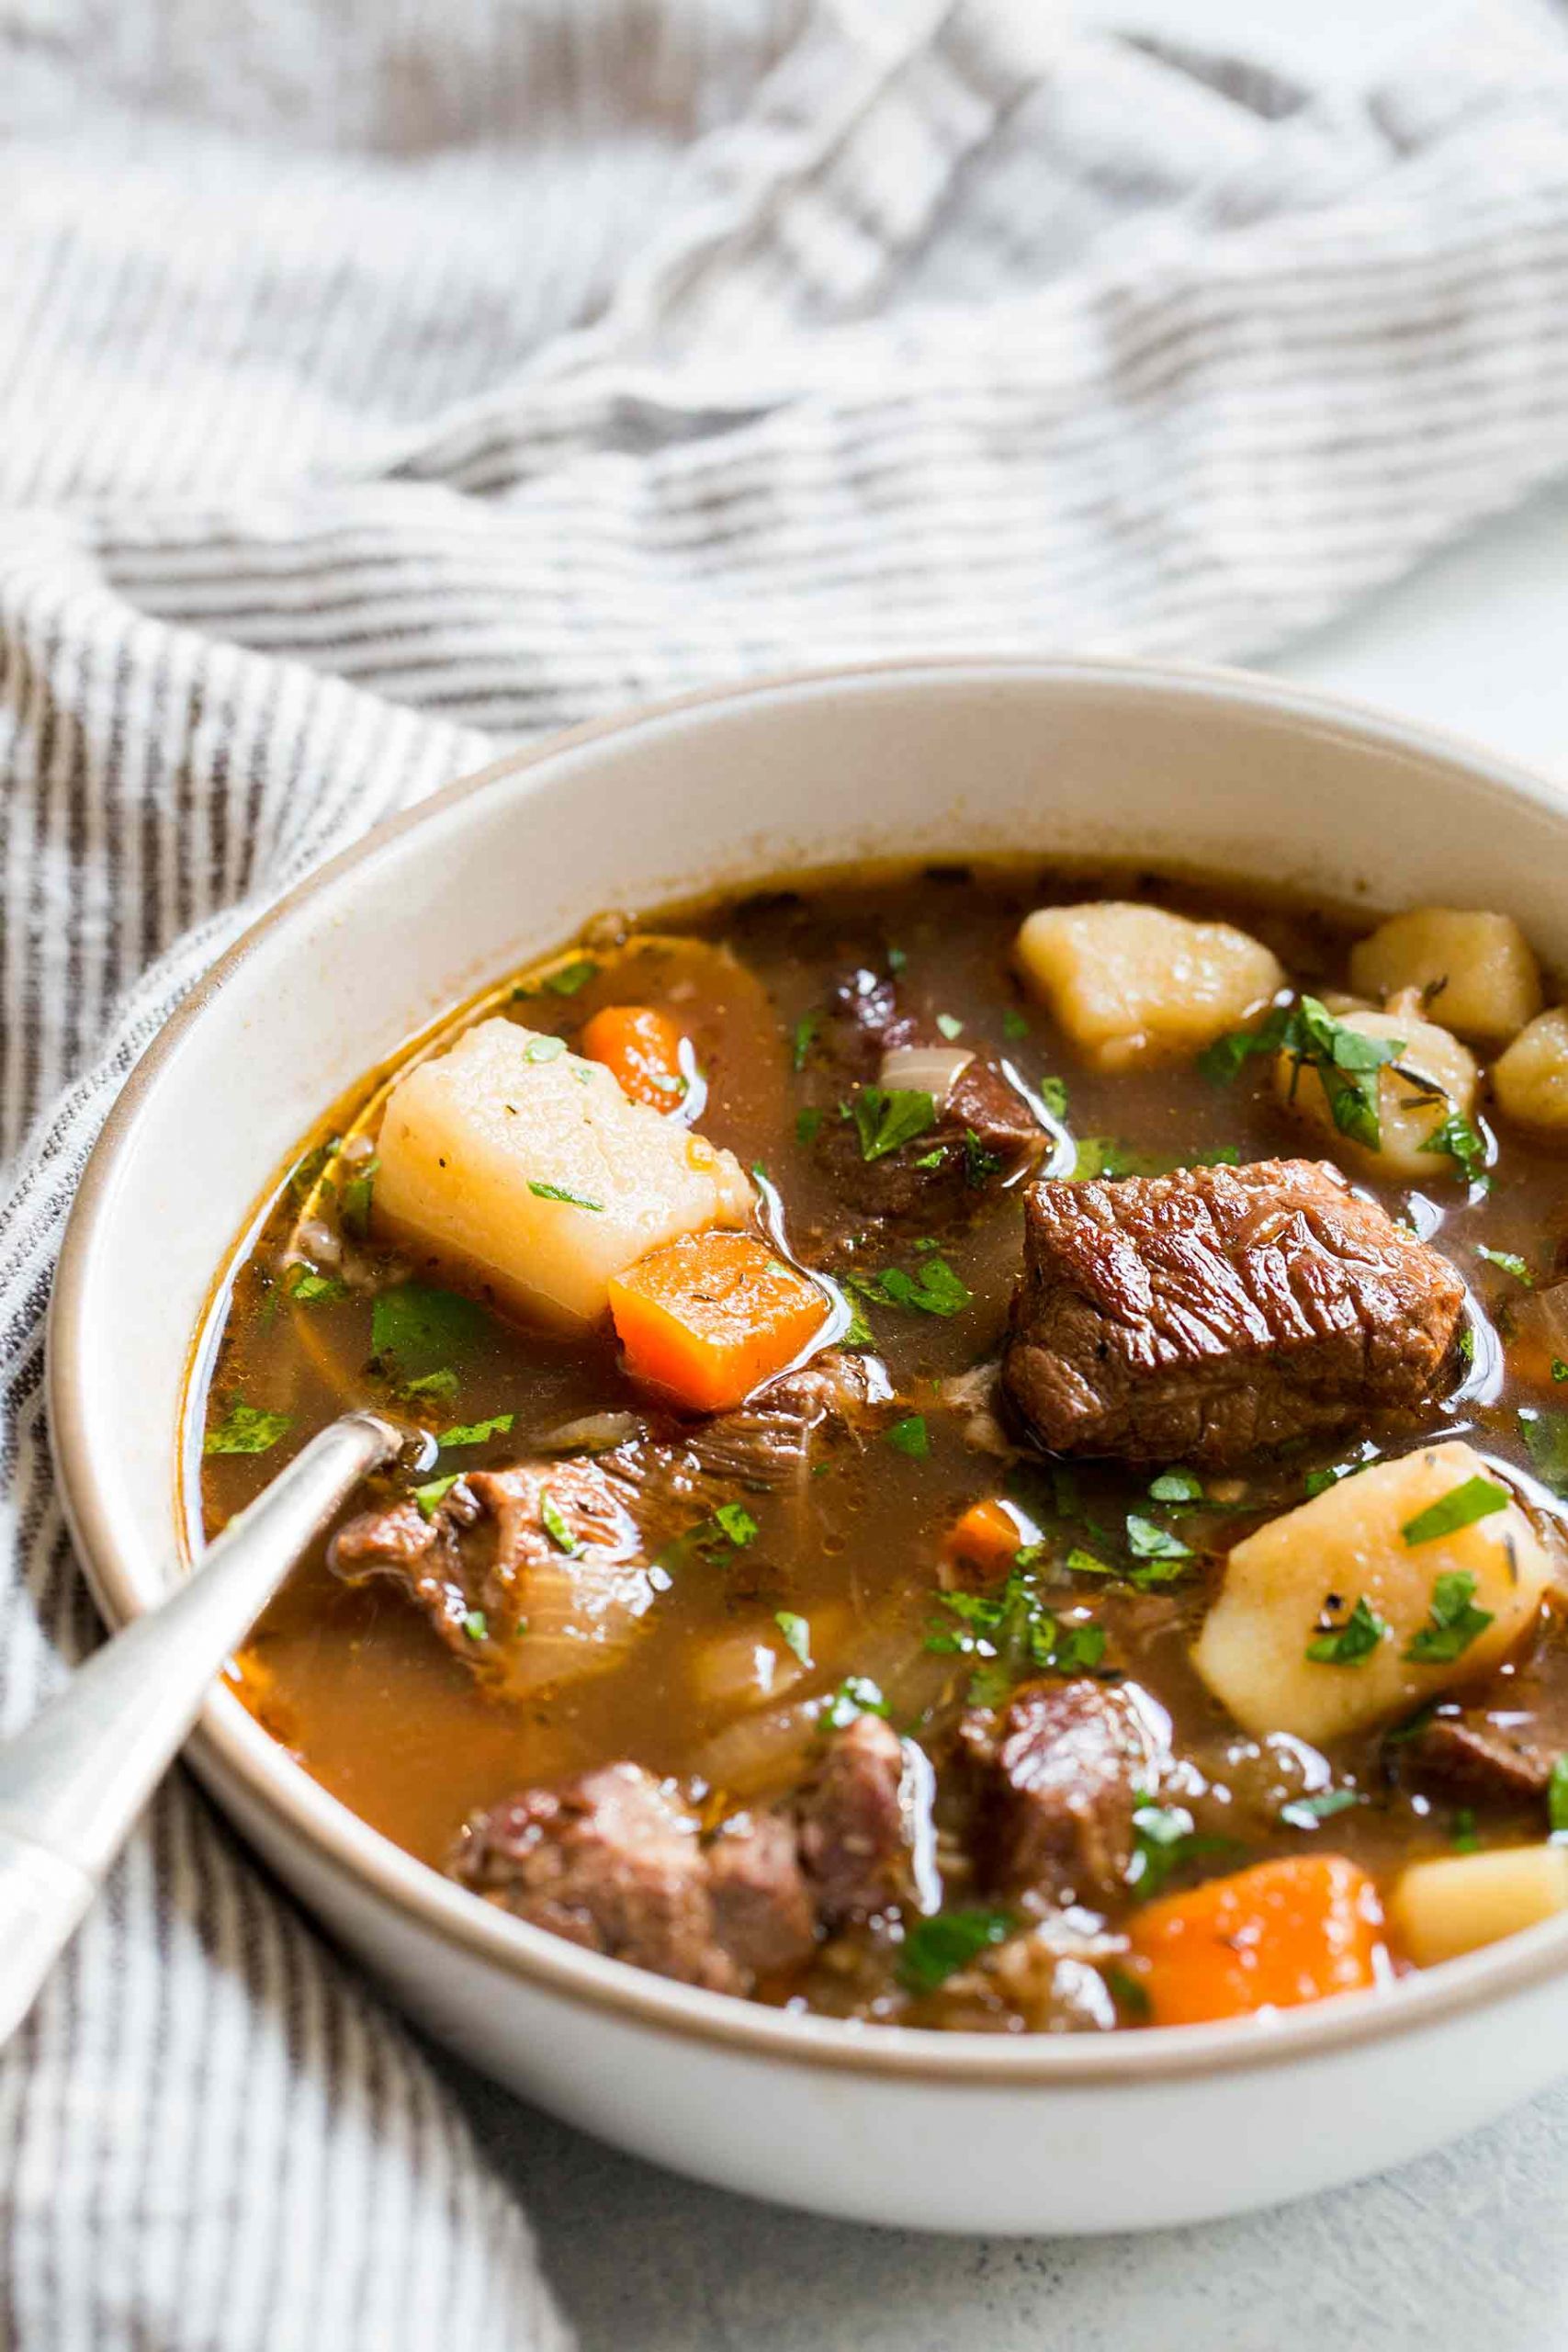 Recipes For Beef Stew Meat
 Irish Beef Stew Recipe with Video